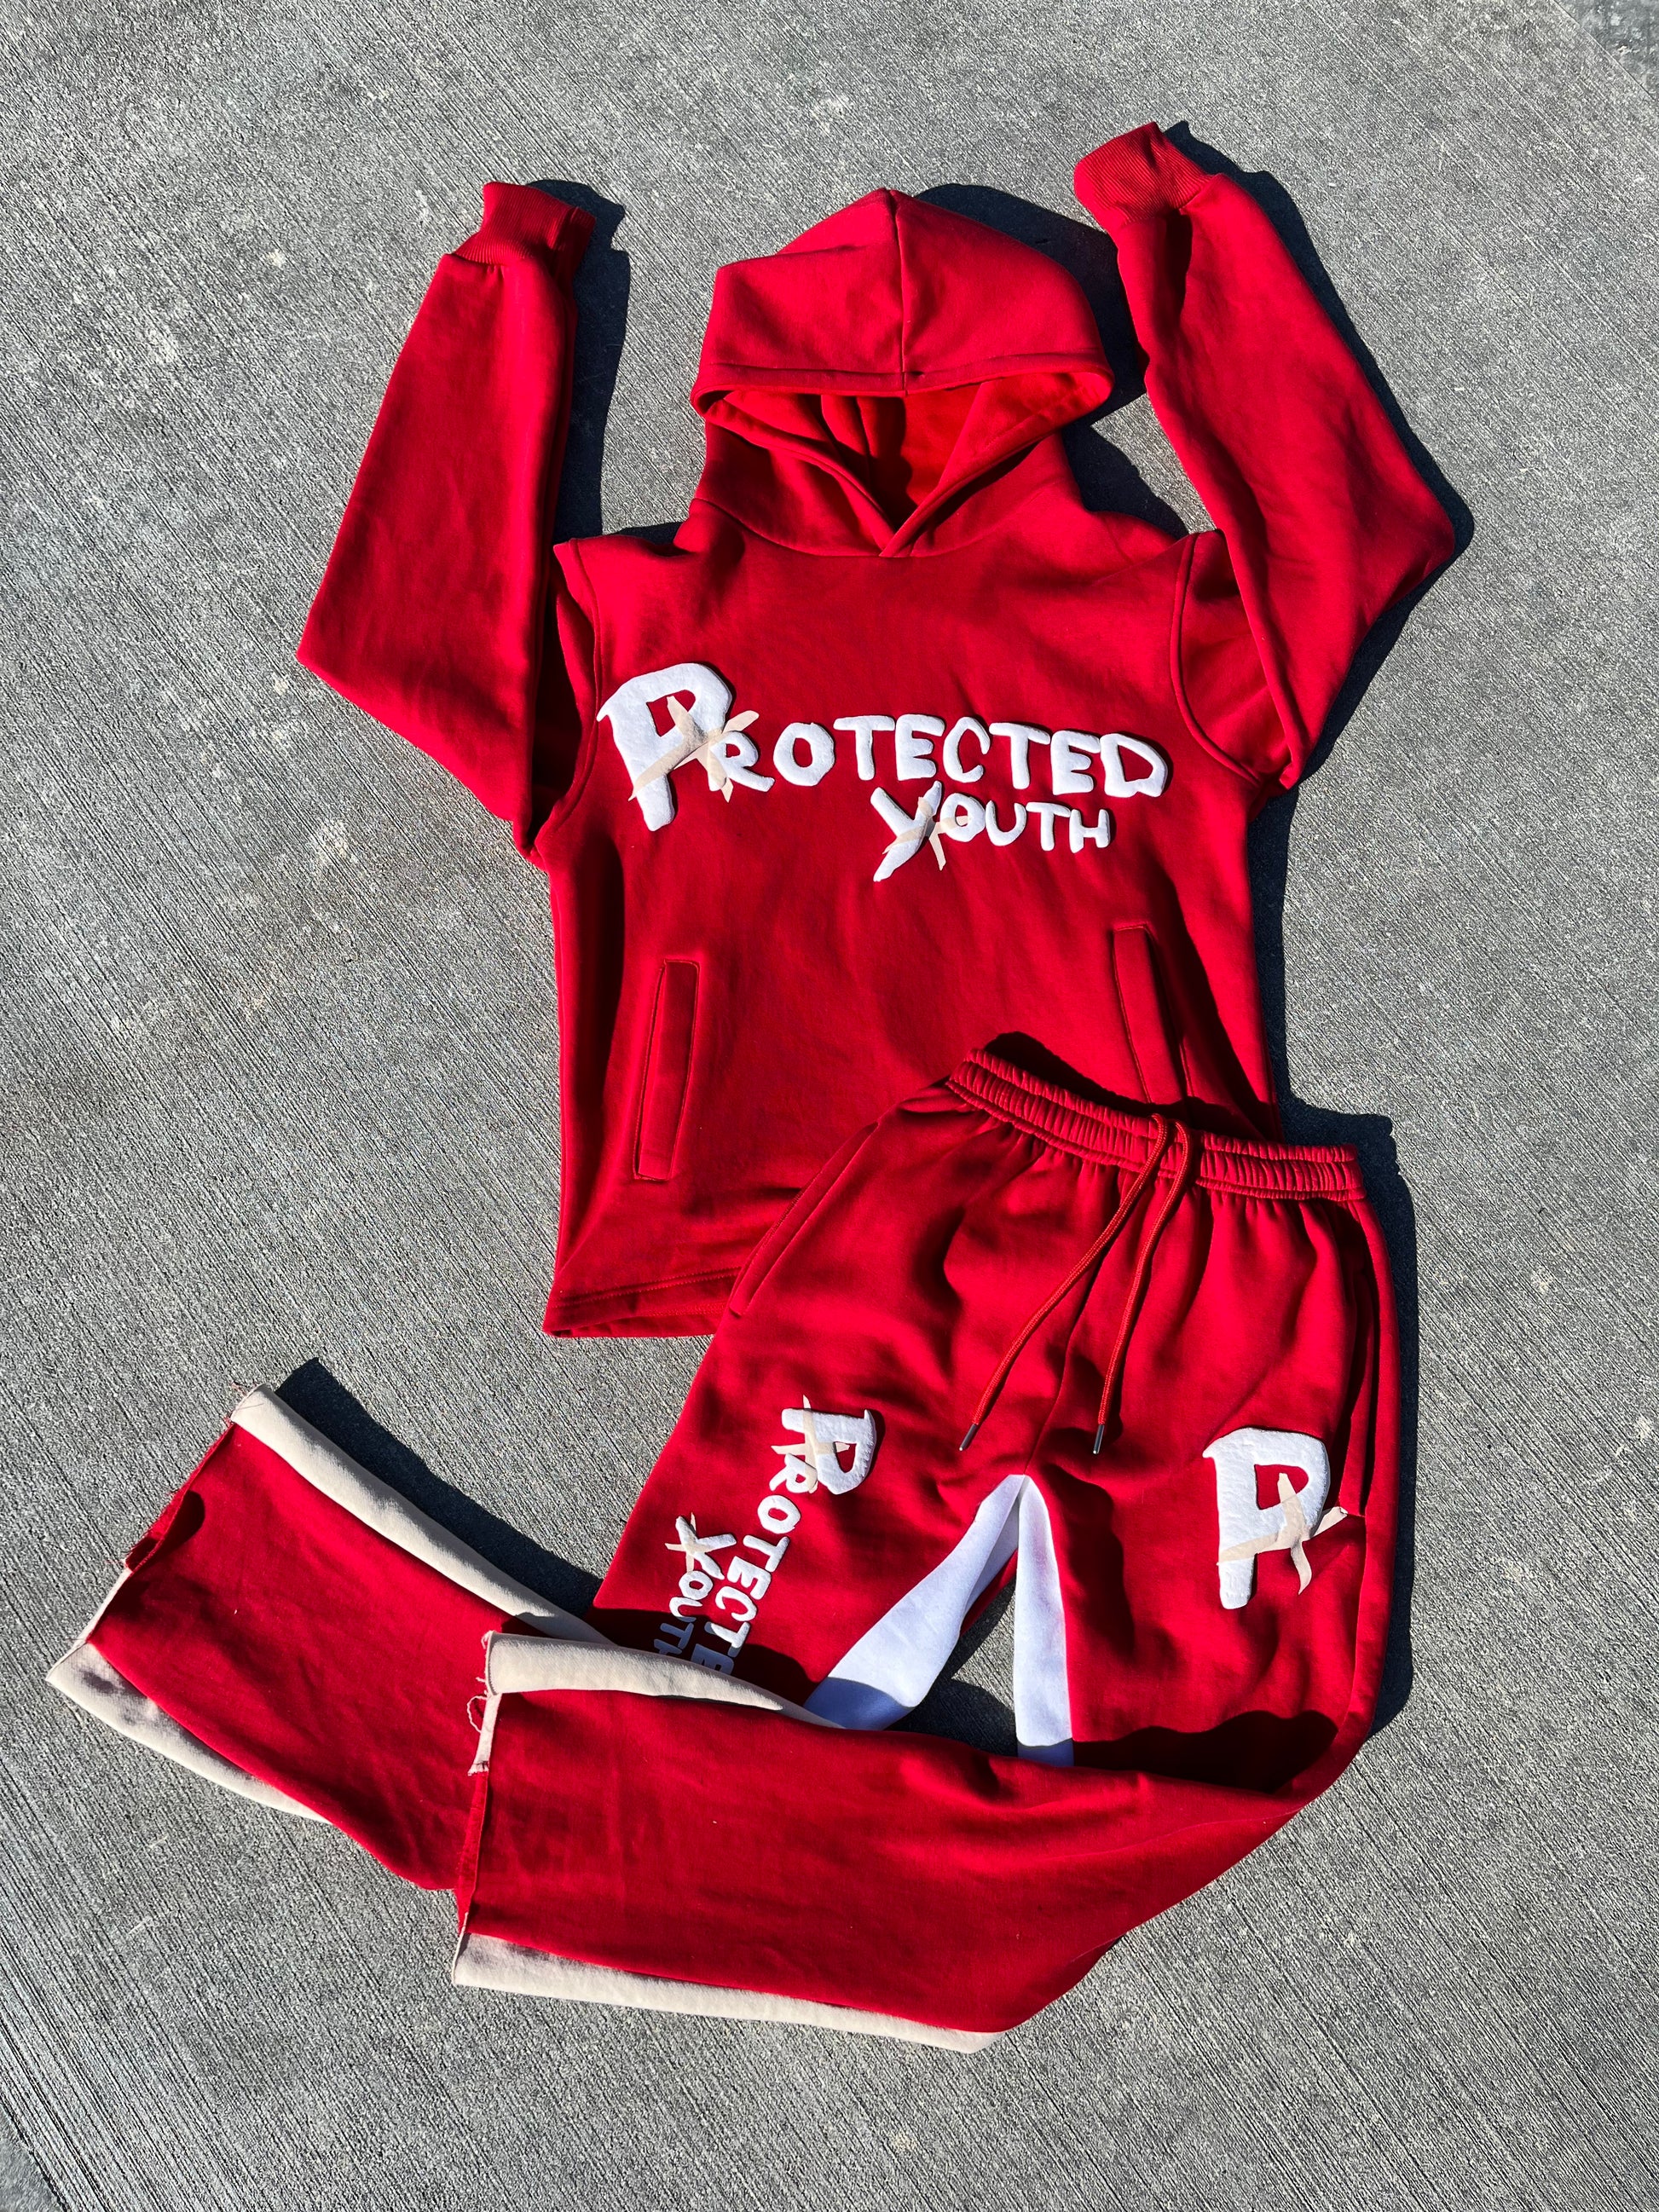 Protected Youth Flared Sweatsuit (Red)